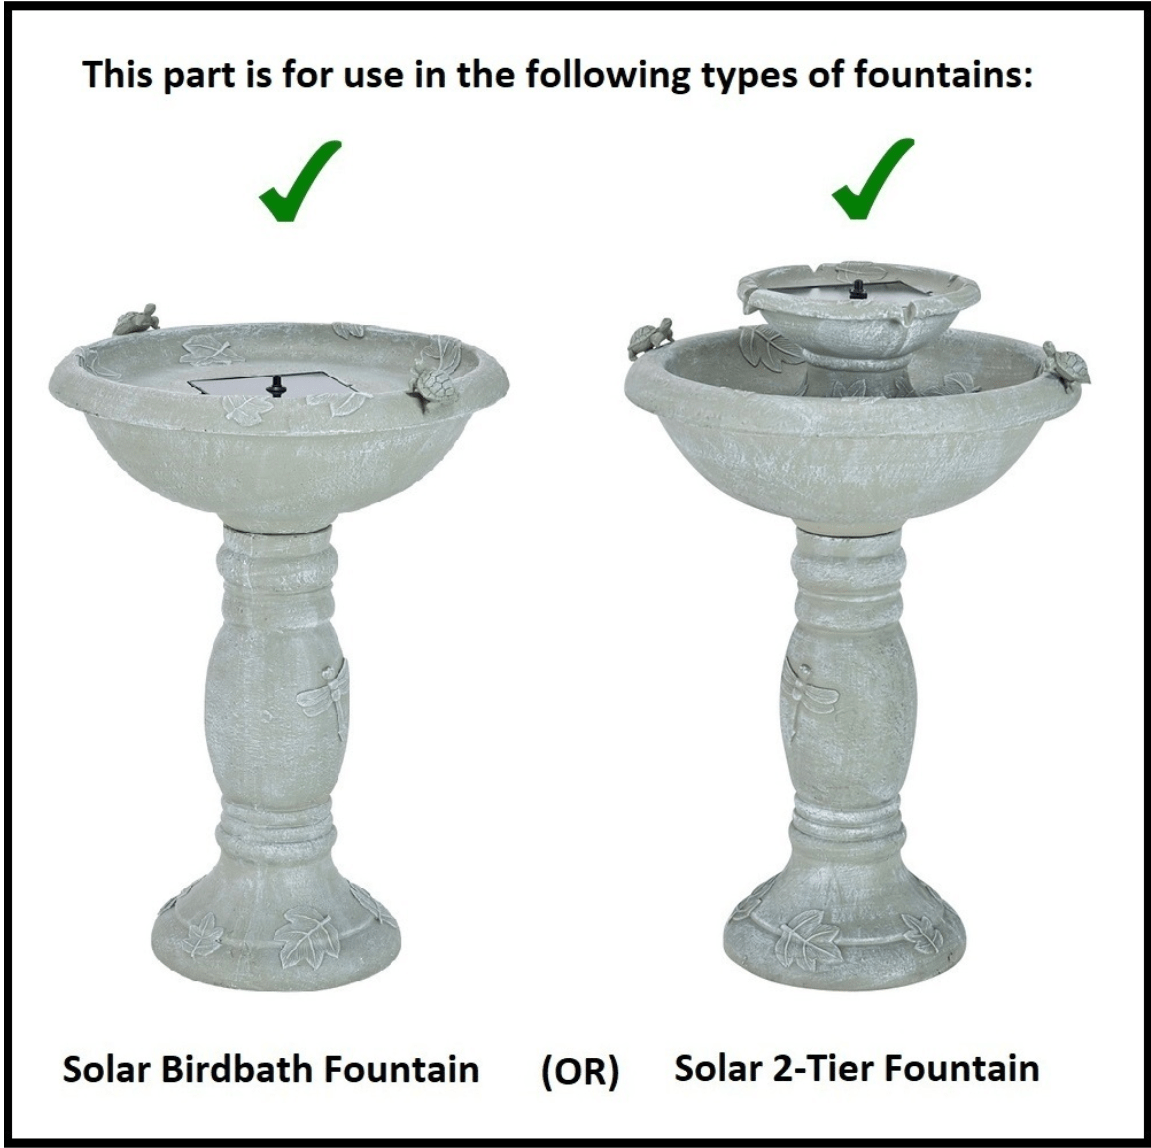 Smart Solar Outdoor Fountains Smart Solar-On-Demand Kit with Battery Pack (for Birdbath or 2Tier Fountain) 20UNPKDT Smart Solar-On-Demand Kit with Battery Pack (for Birdbath or 2Tier Fountain) 20UNPKDT